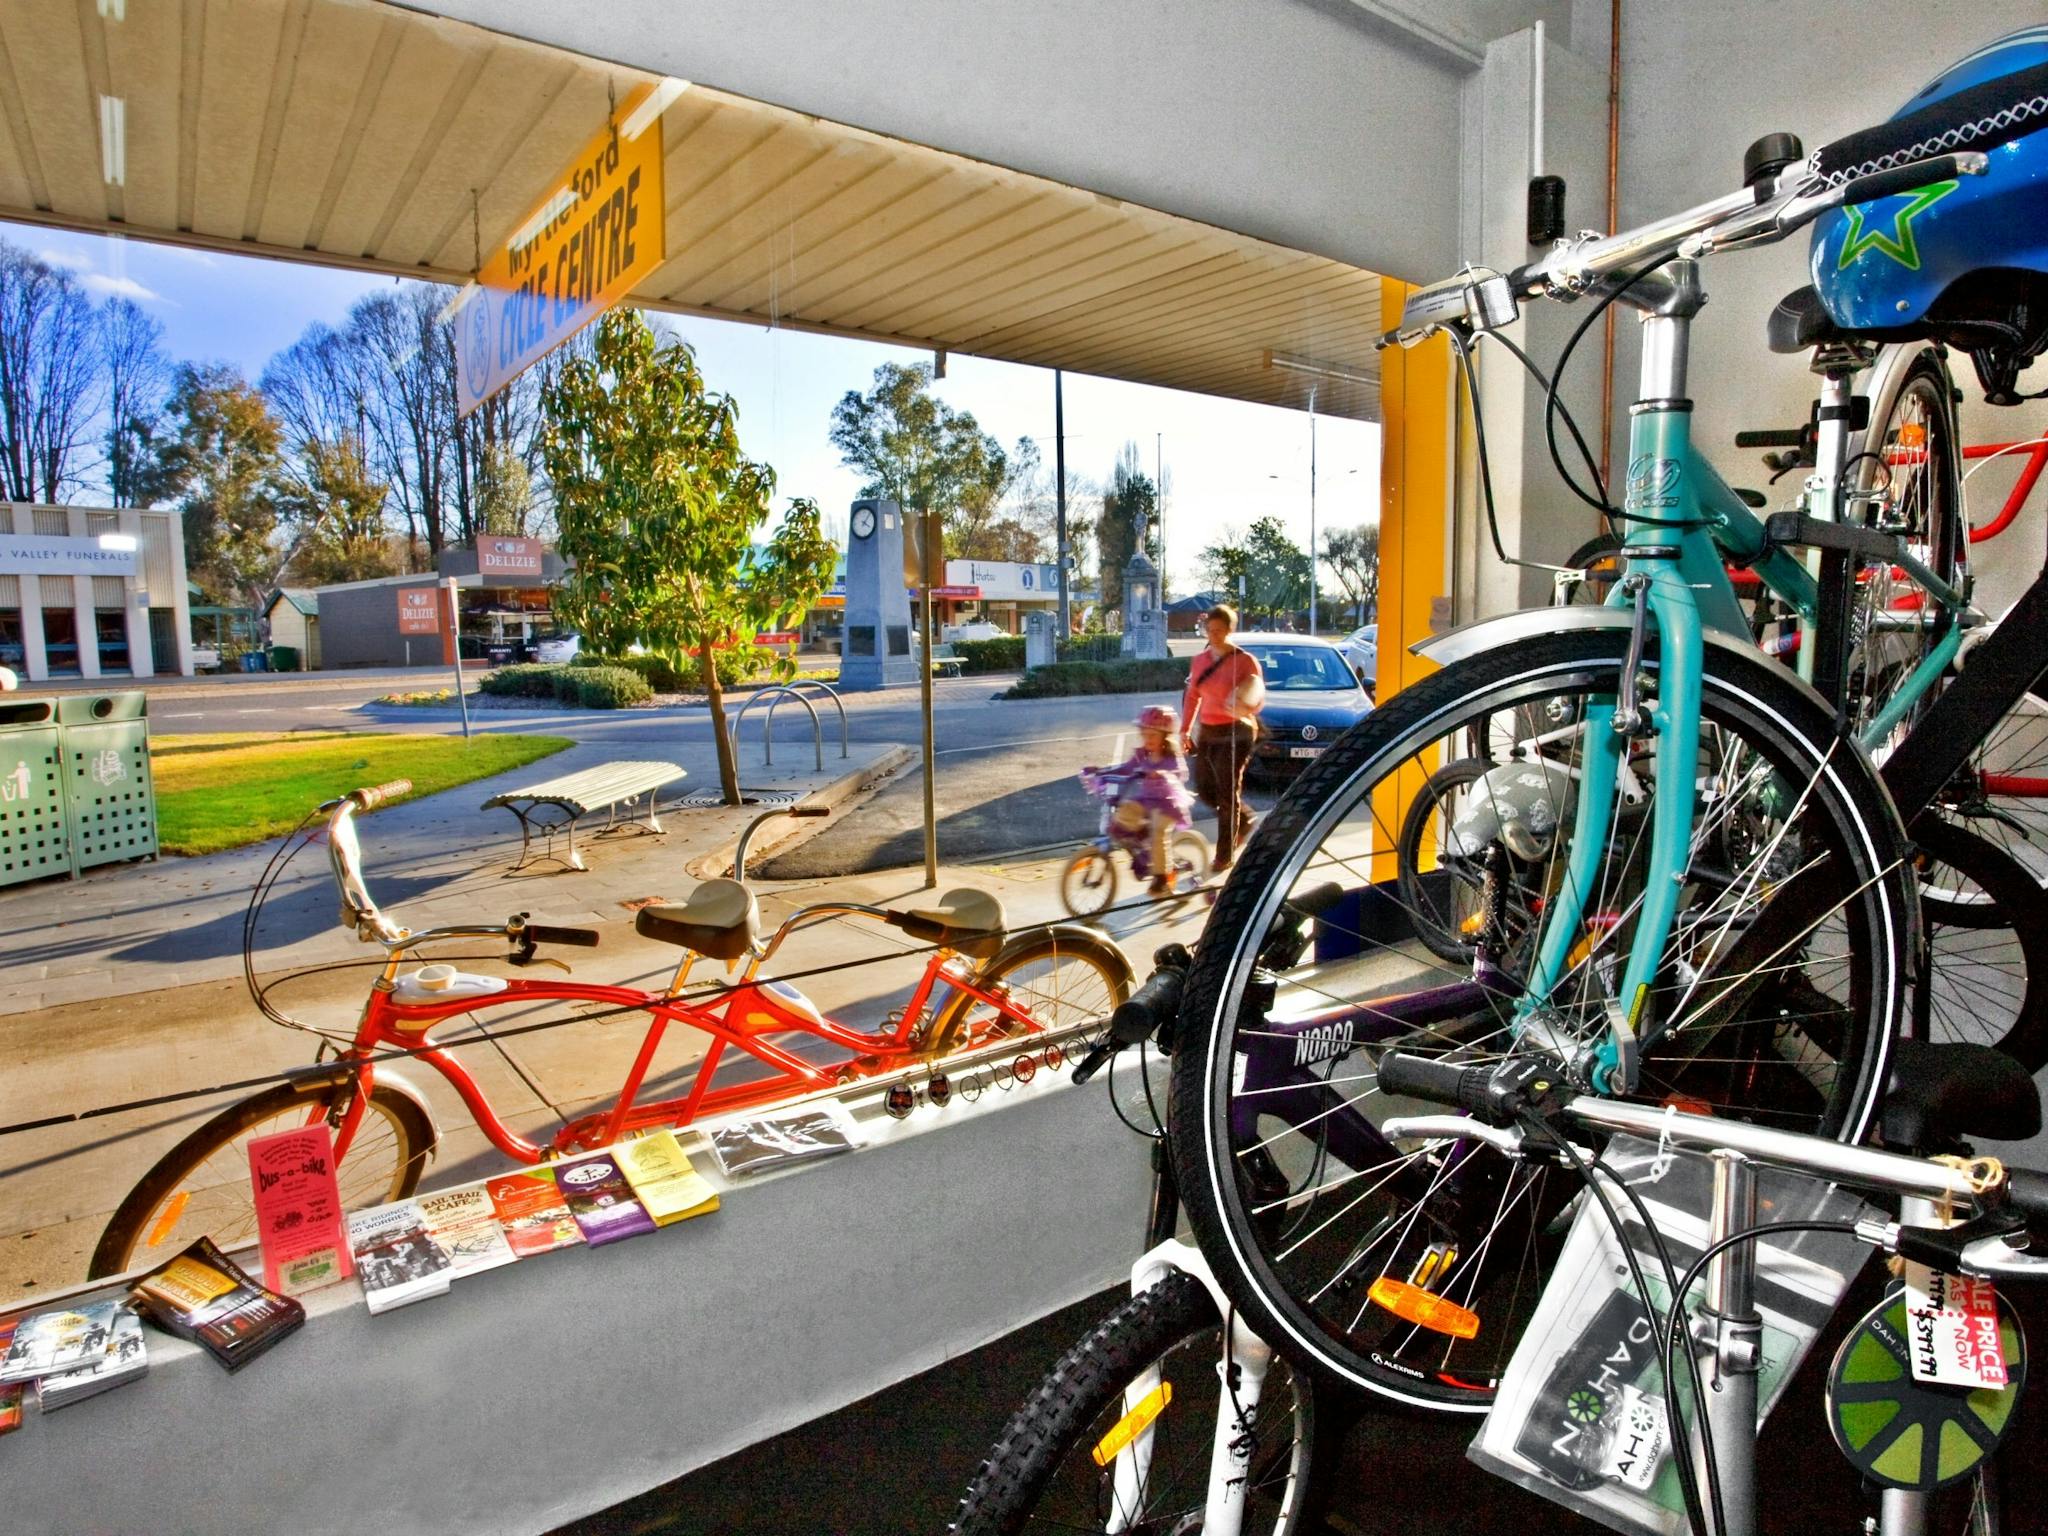 Myrtleford Cycle Centre is conveniently located in the heart of town